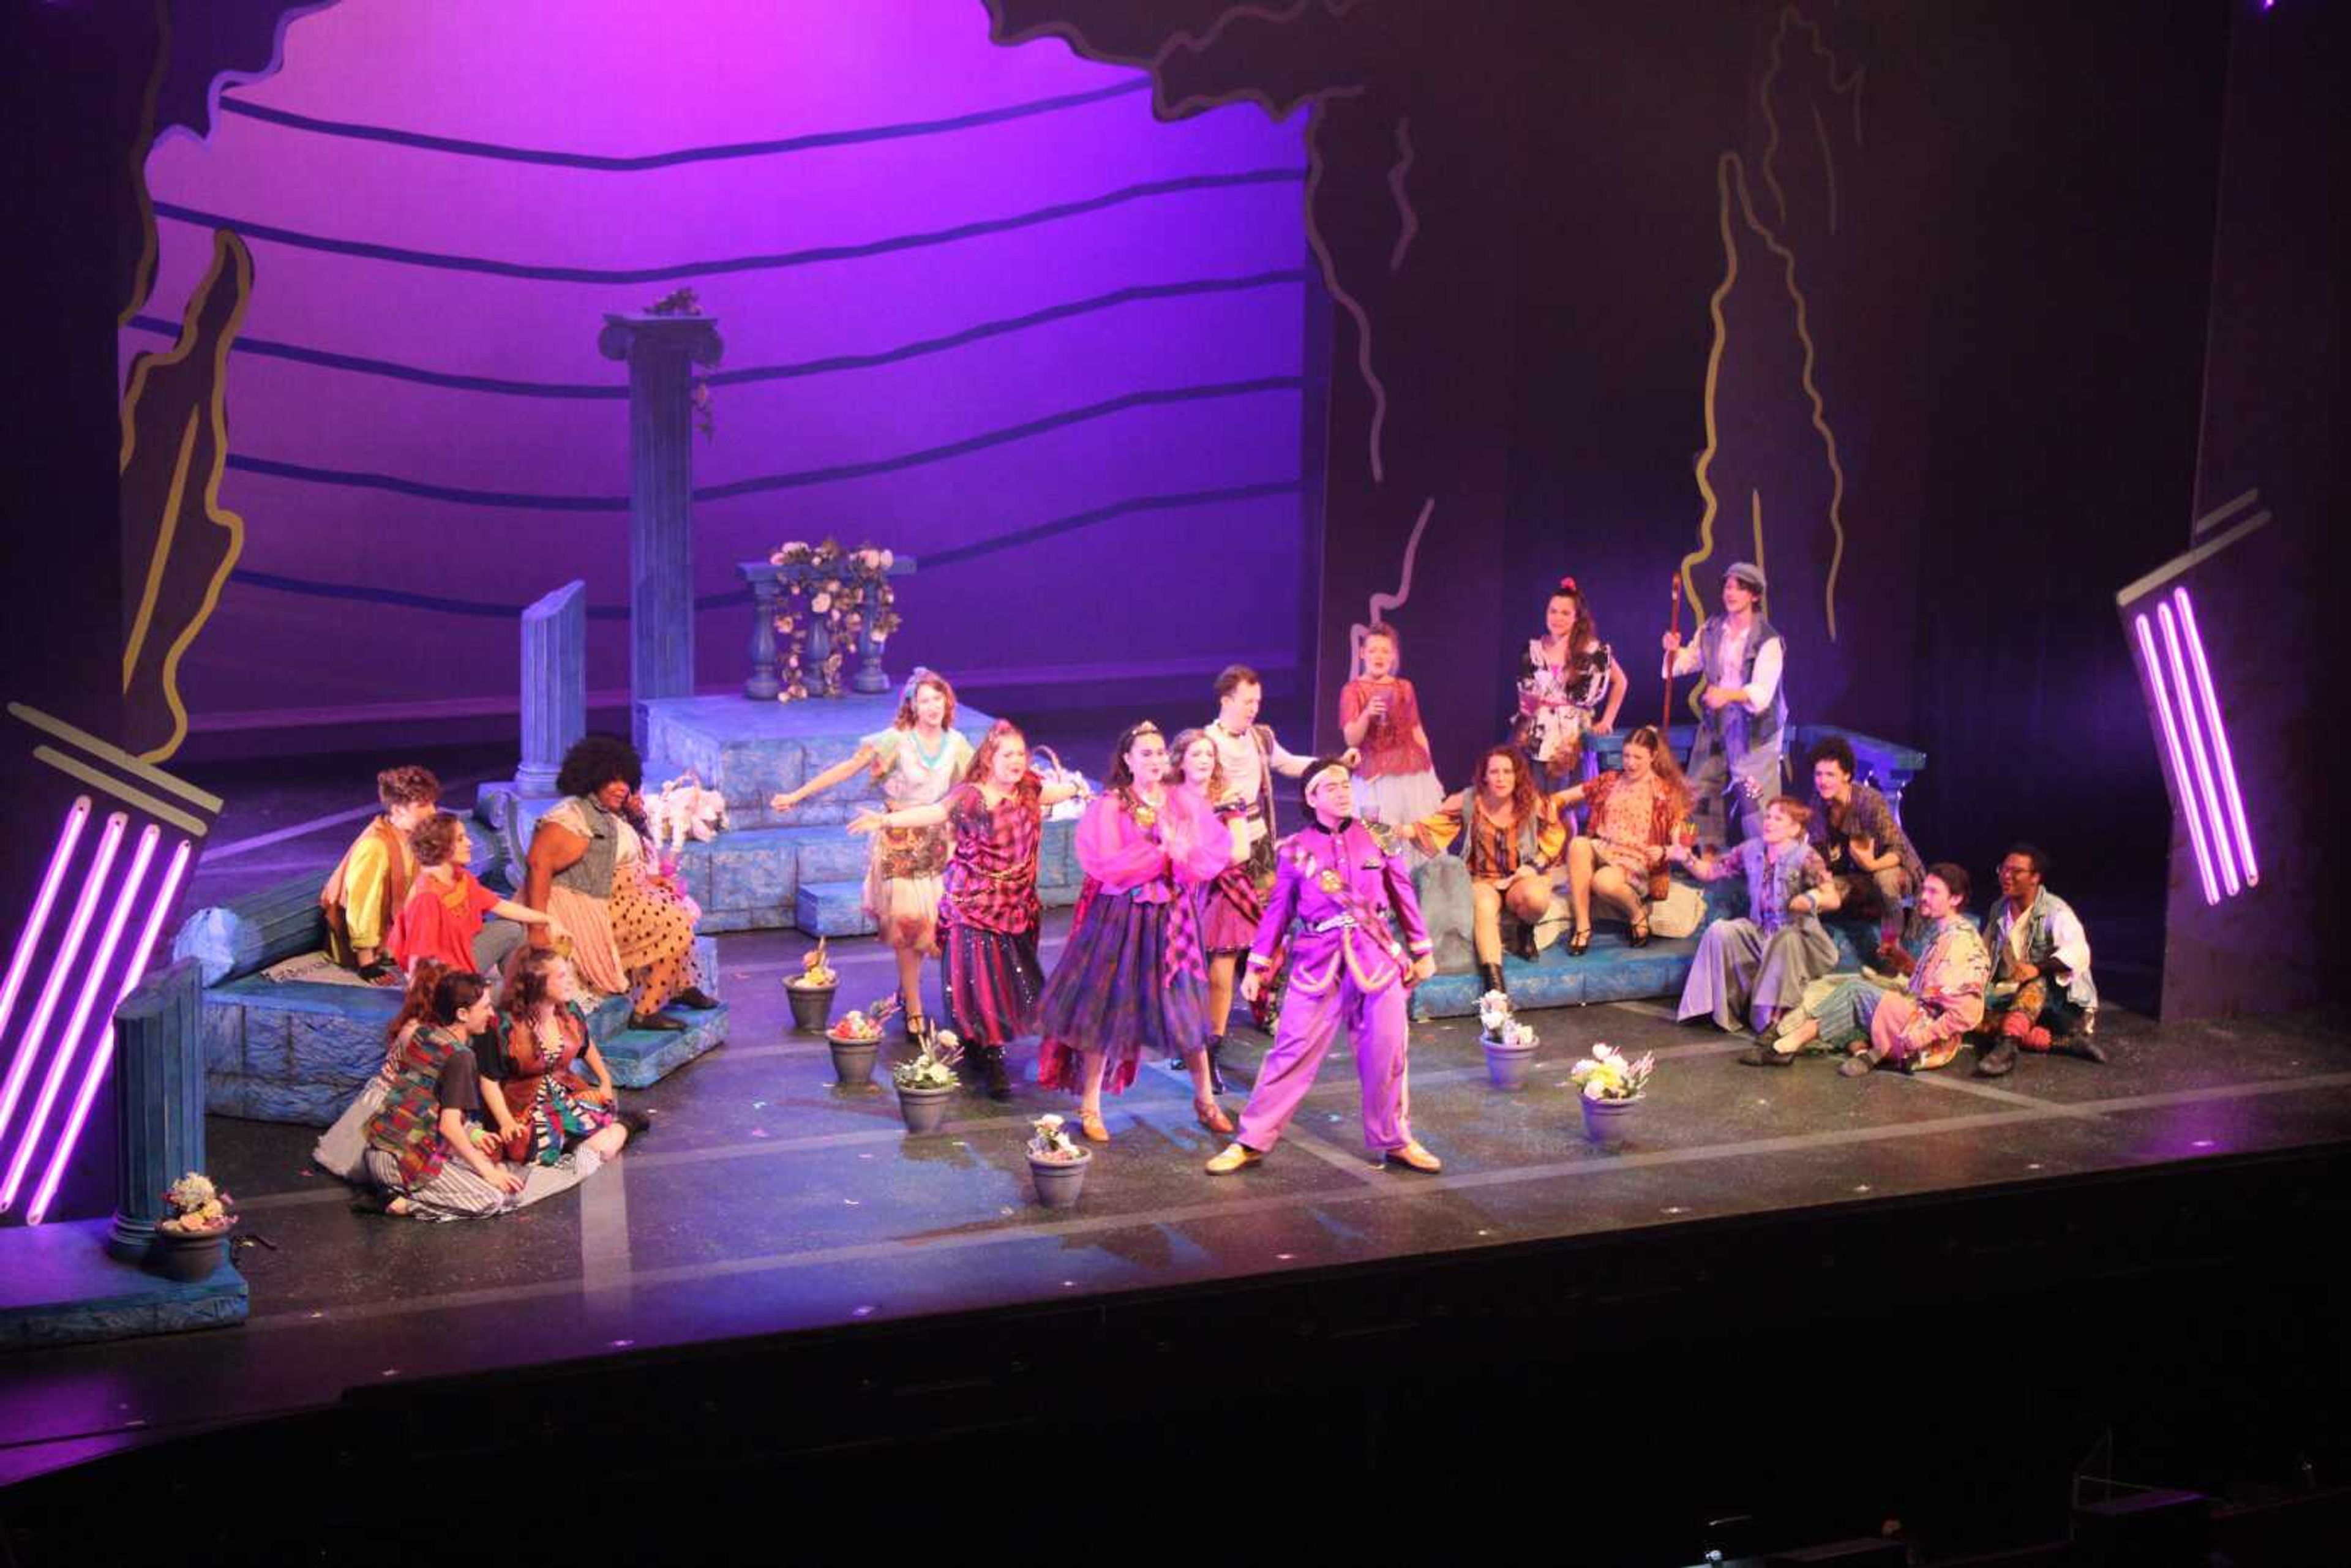 The main Cast and support cast begin performing.